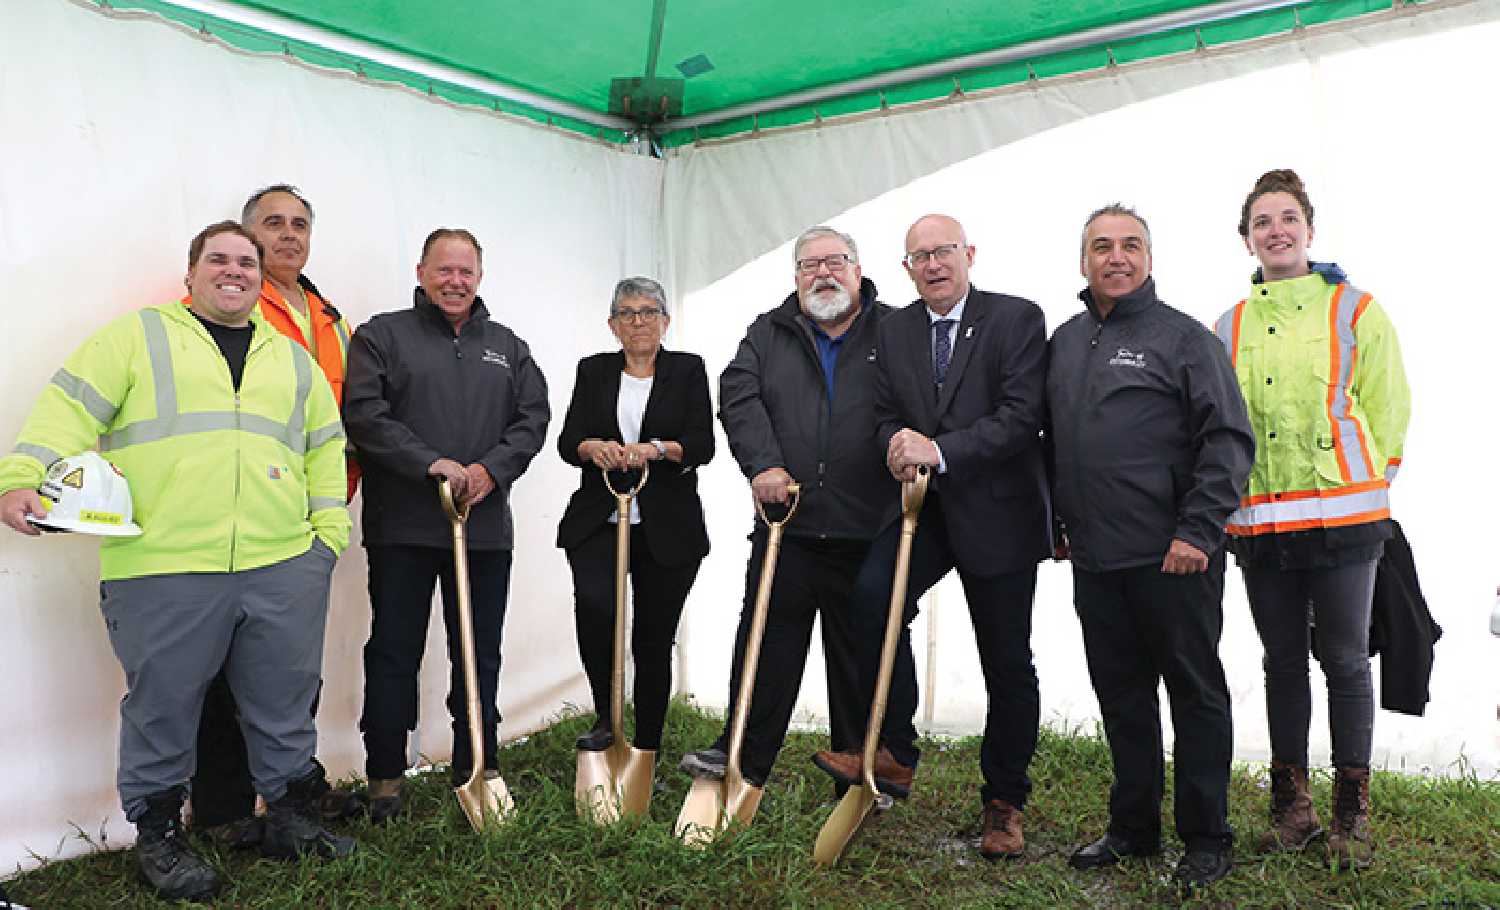 Left: Jon Zapski of Allied Infrastructure, Utilities Foreman Ron Hozjan Councillor Vernon Petracek, Councillor Maggie Rowland, Mayor Grant Forster, MLA Warren Kaeding, CAO Mike Thorley and Brandi Neibrandt of Allied Infrastructure celebrated the recent start of construction on their more than $29.9 million regional water system project for the Town of Esterhazy.